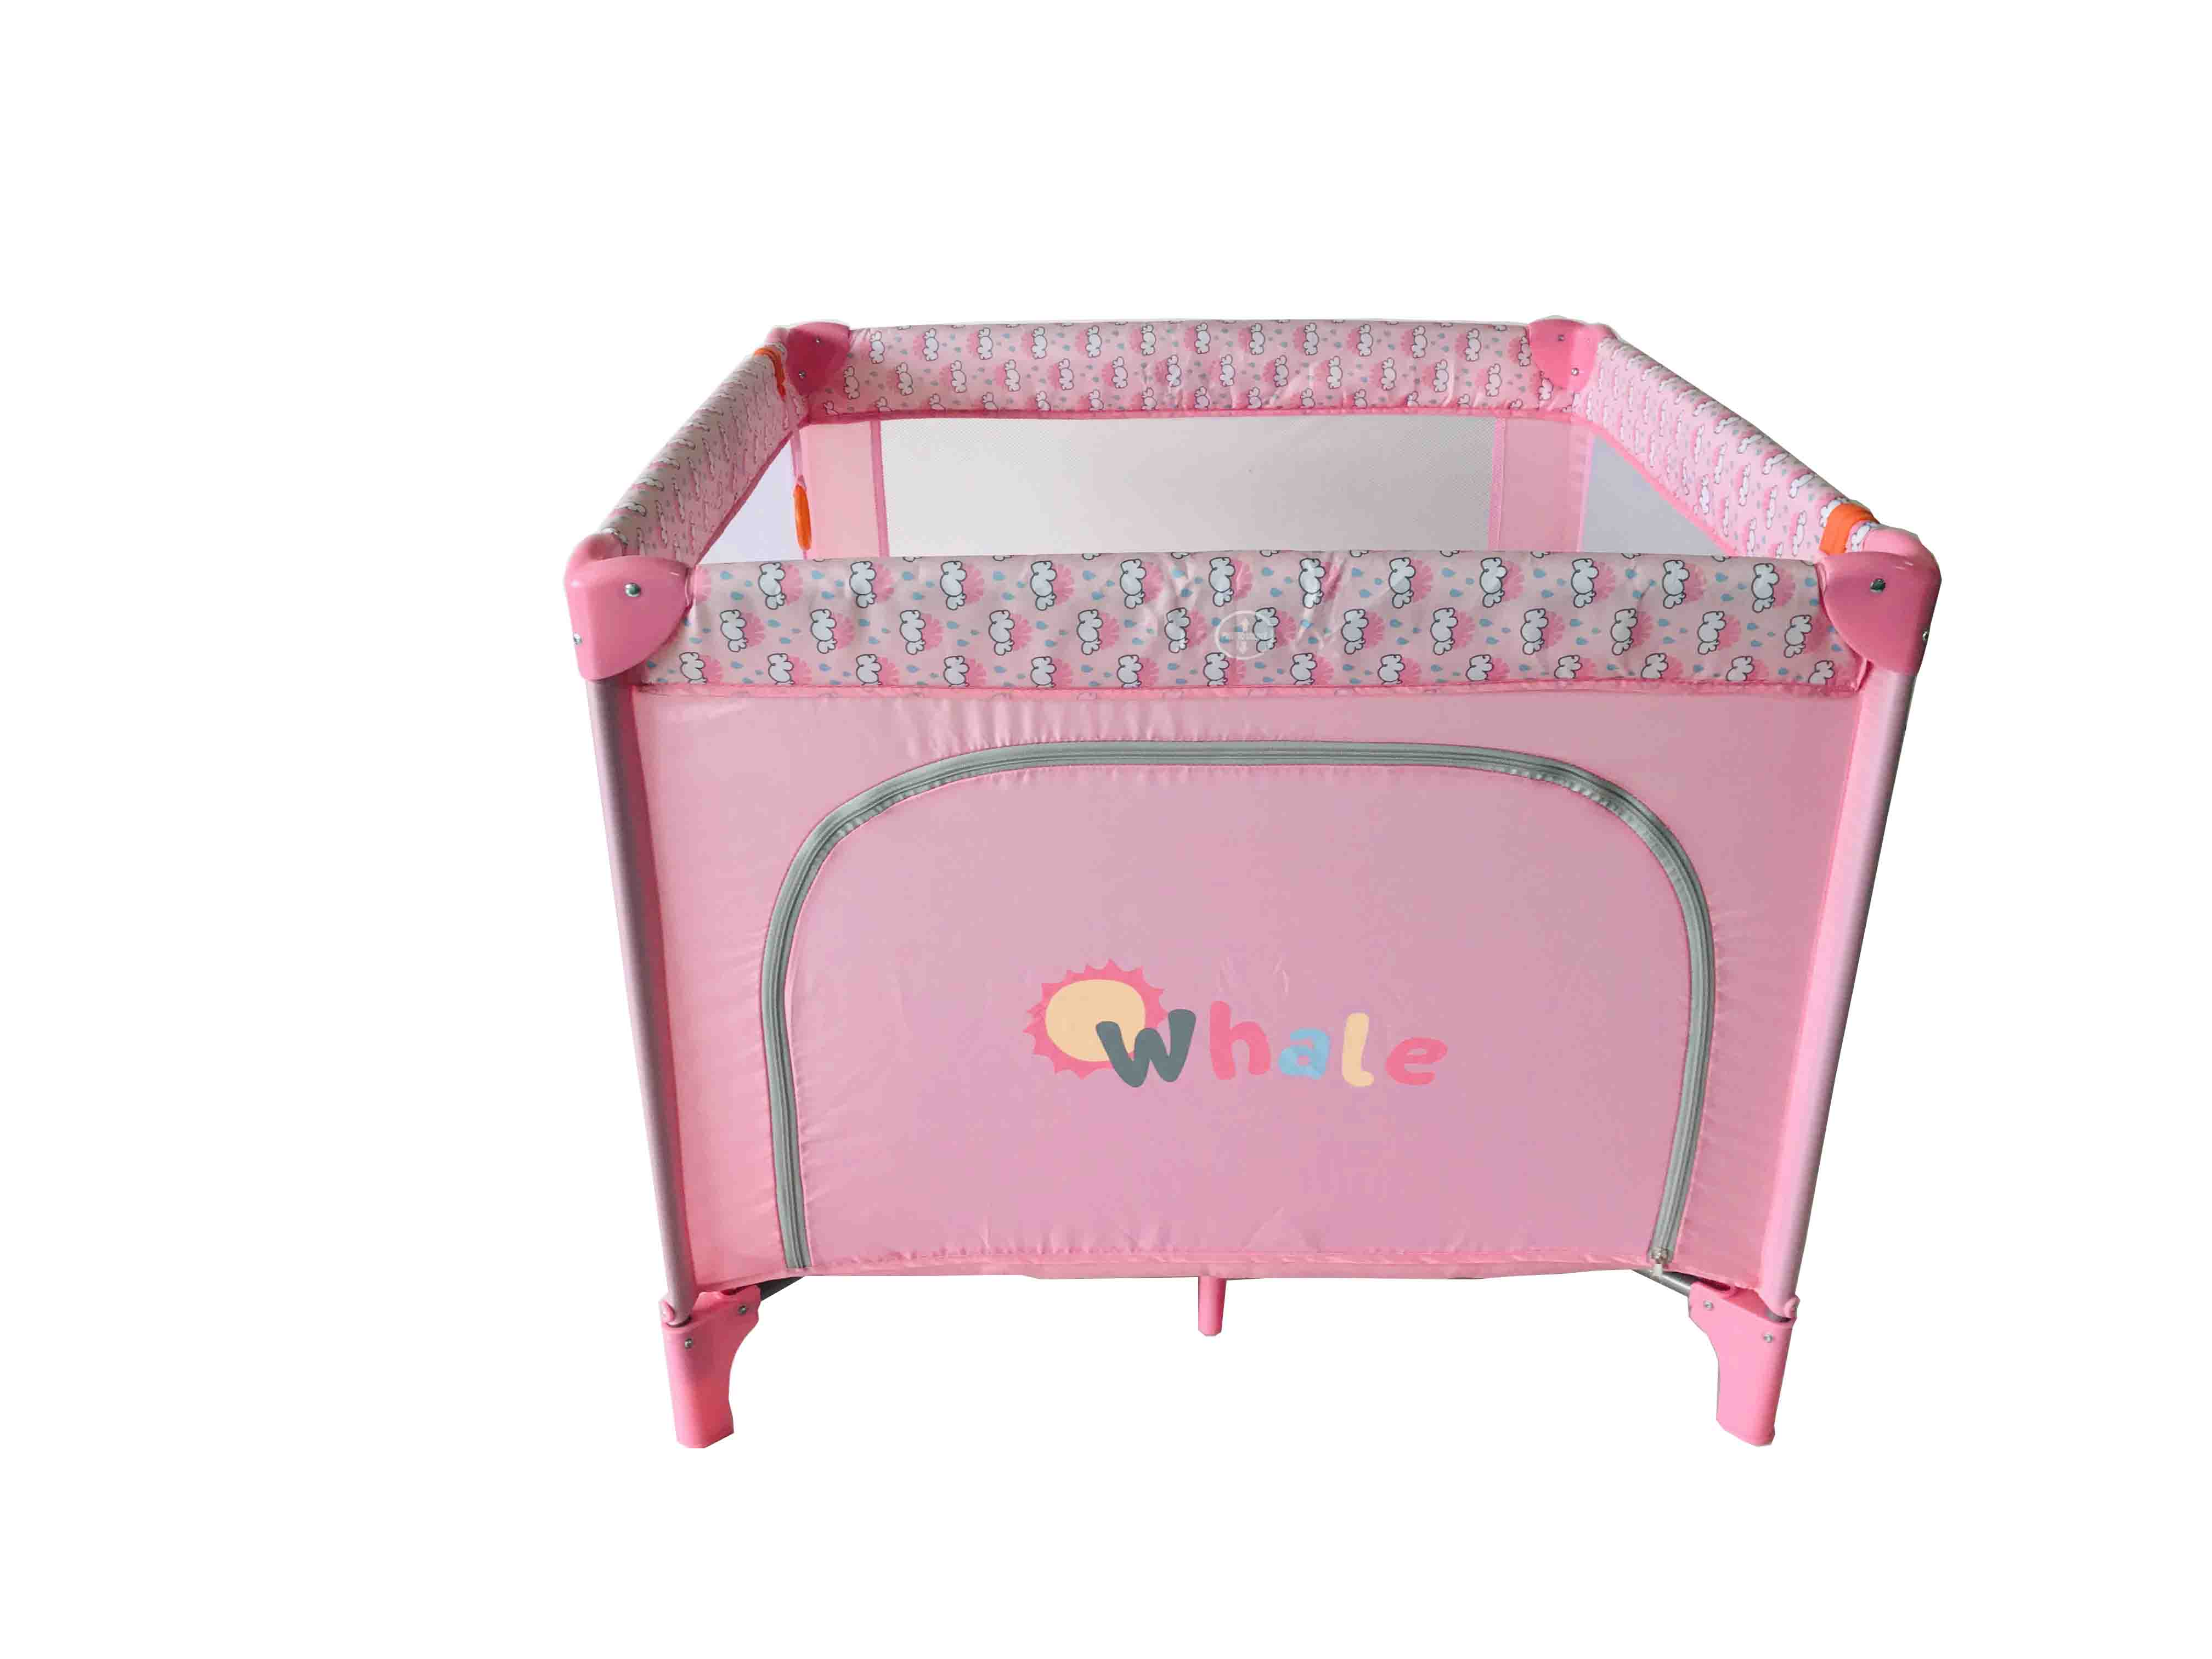 pink square playpen large baby fence play yard Factory